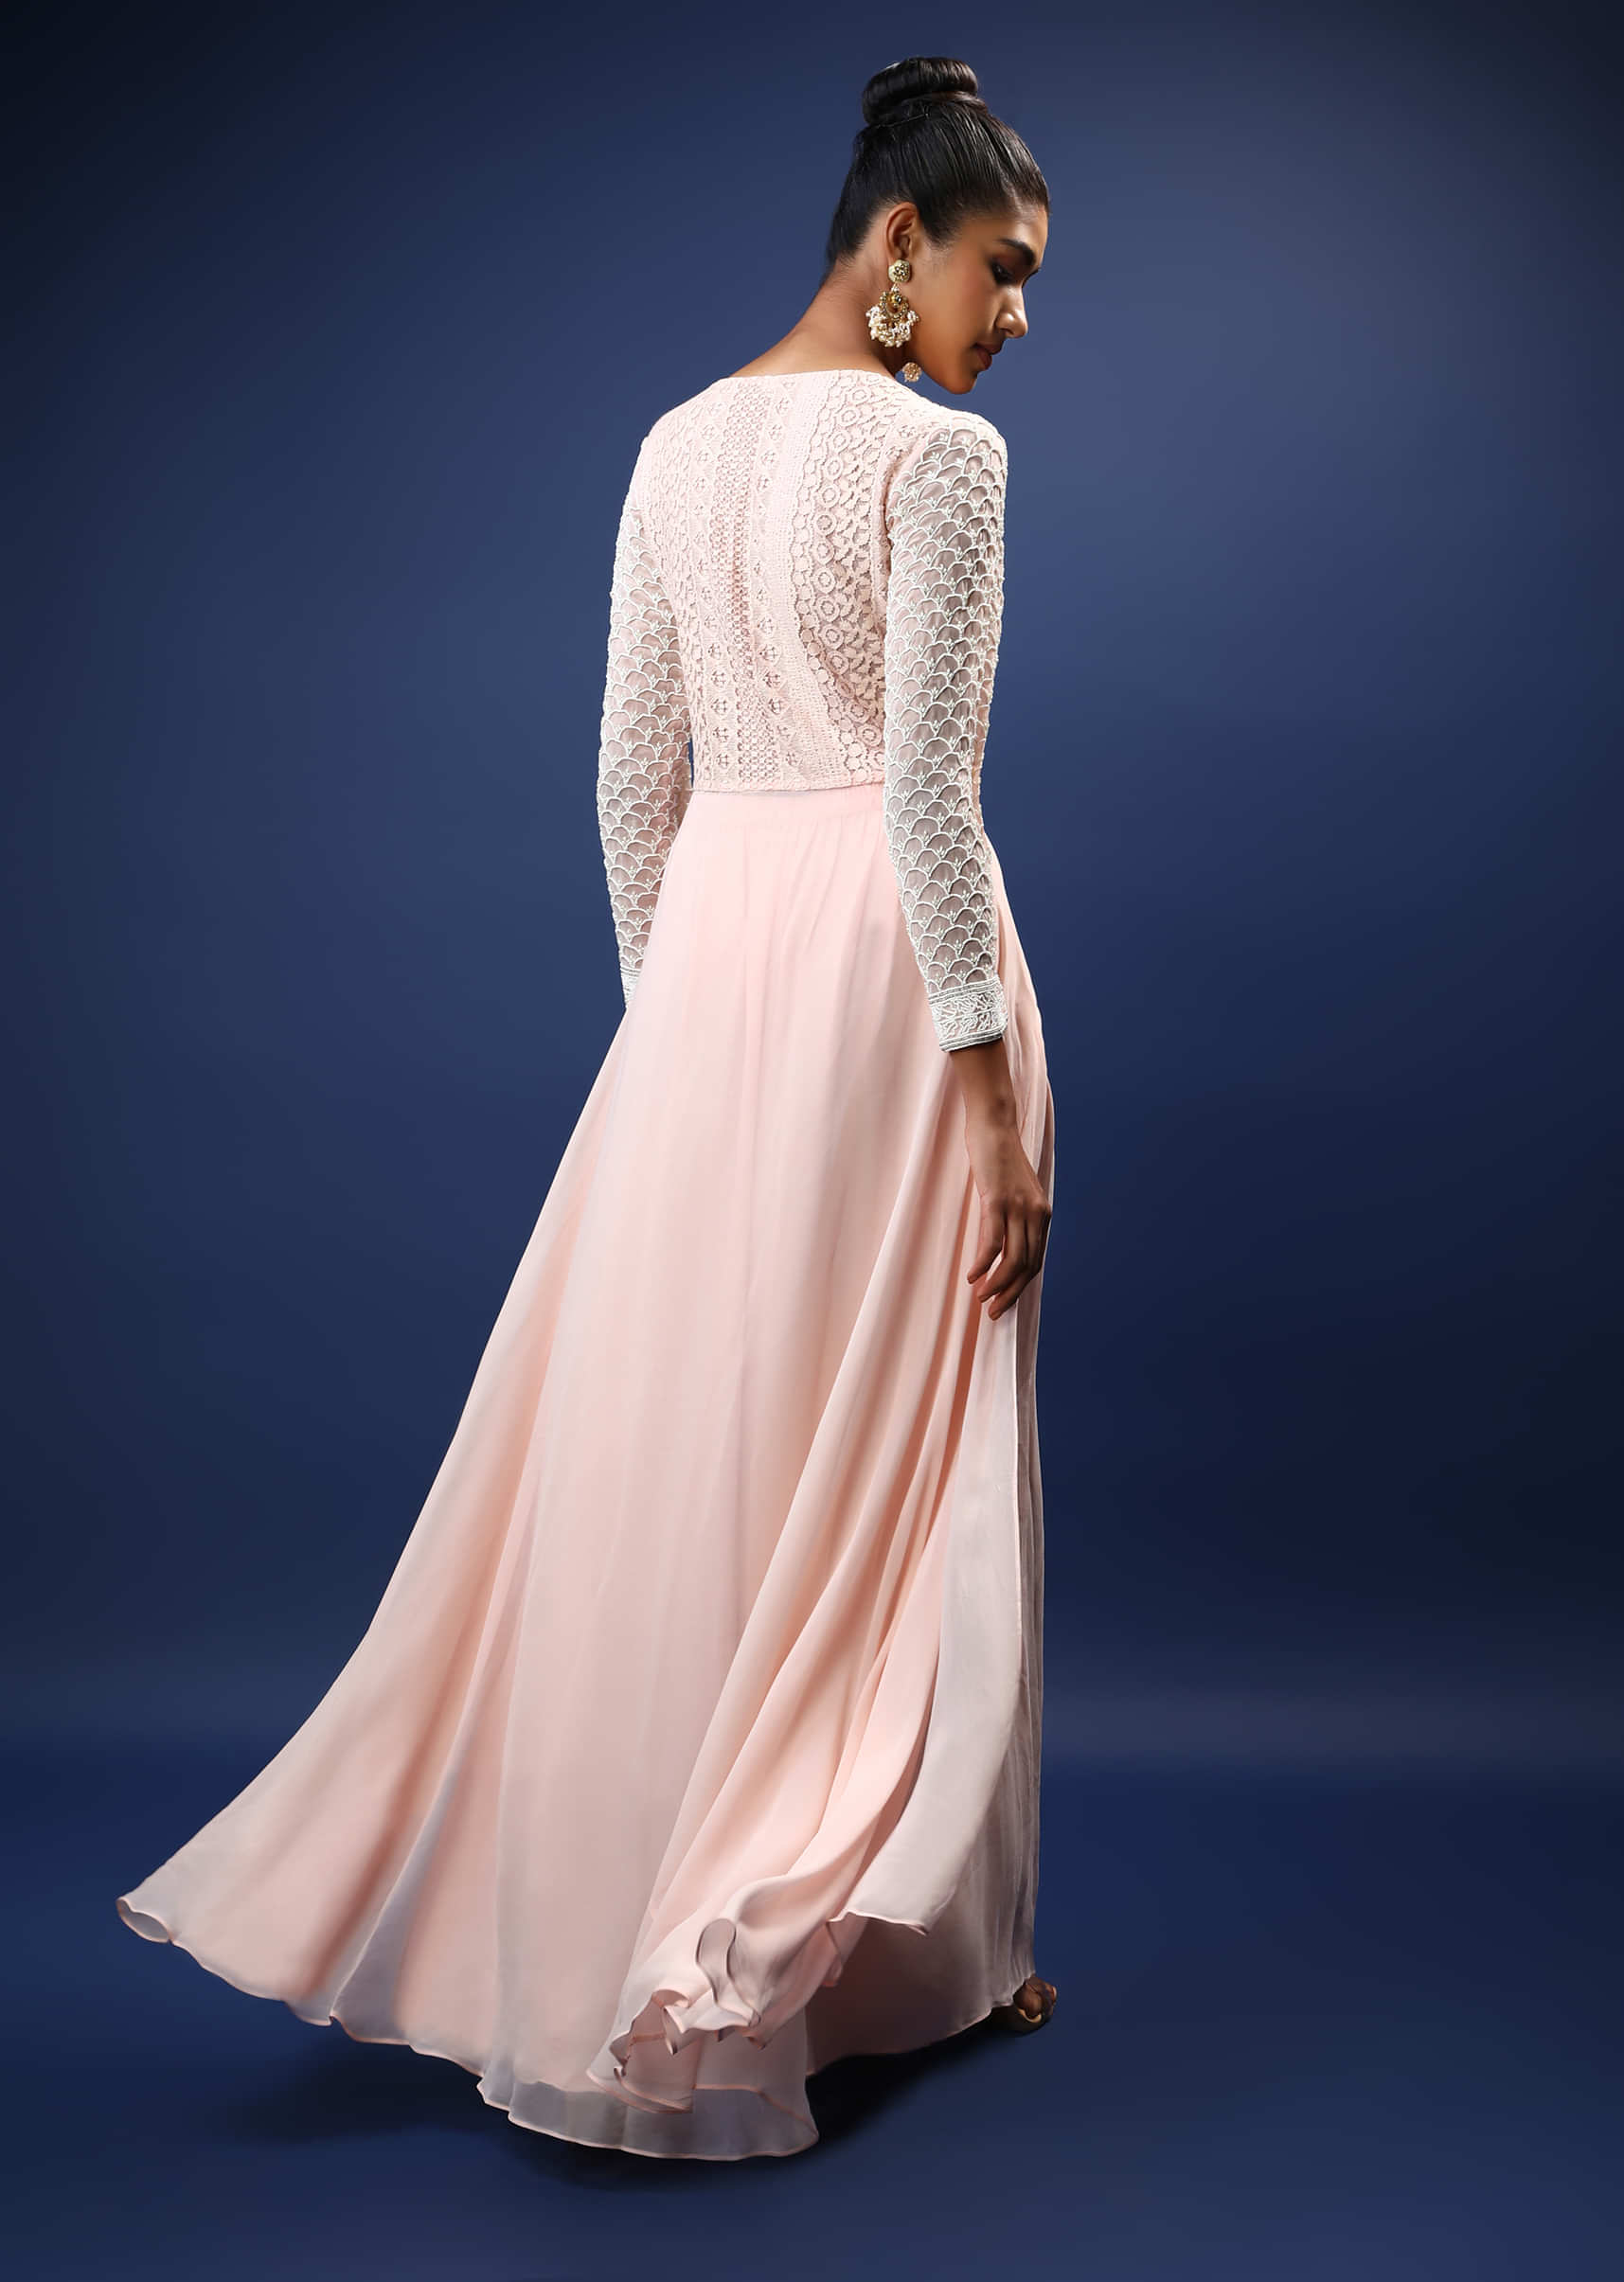 Powder Pink Palazzo Suit In Georgette With A Long Slit Top In Crochet Lace Adorned In Moti Bead Detailing  